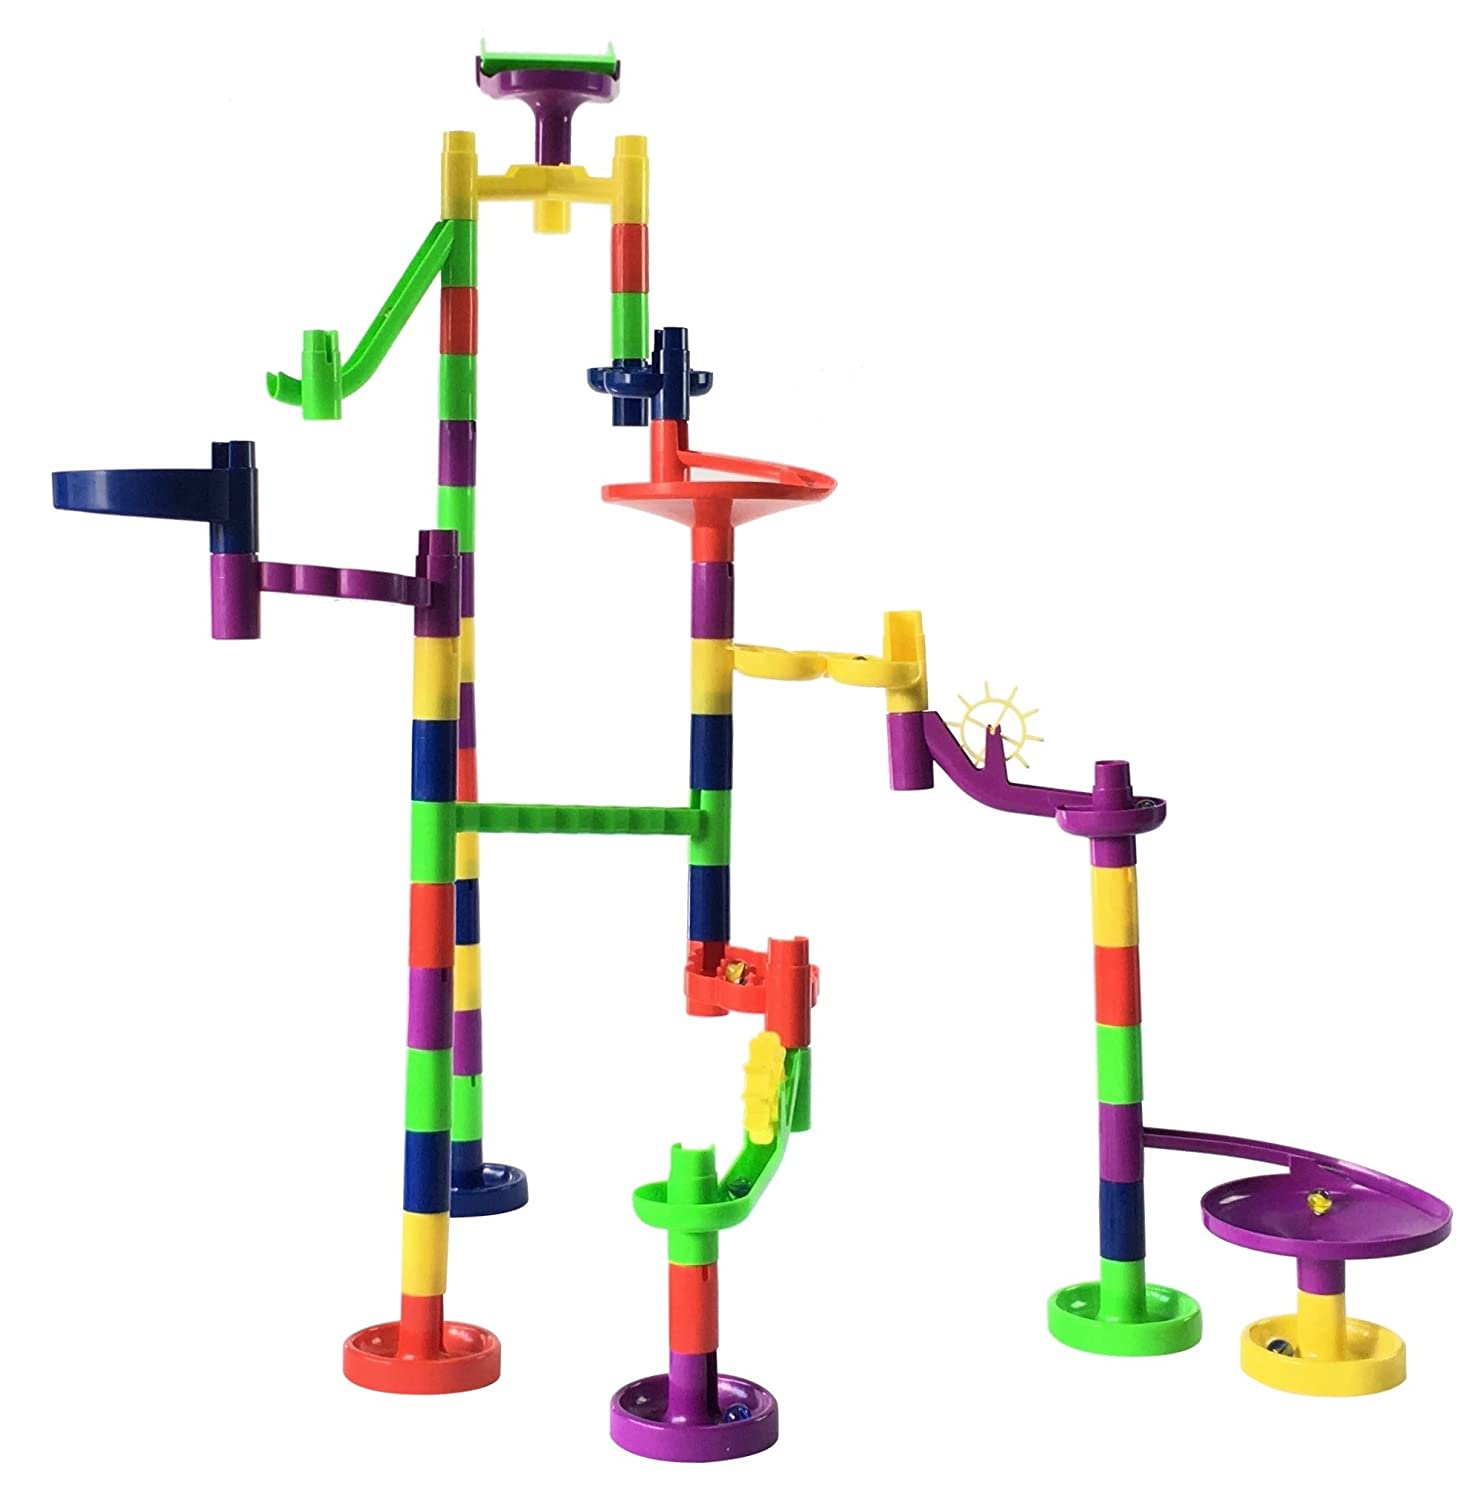 Mr. Marble Run Starter Set (48 Large Marble Run Pieces + 10 Glass Marbles)